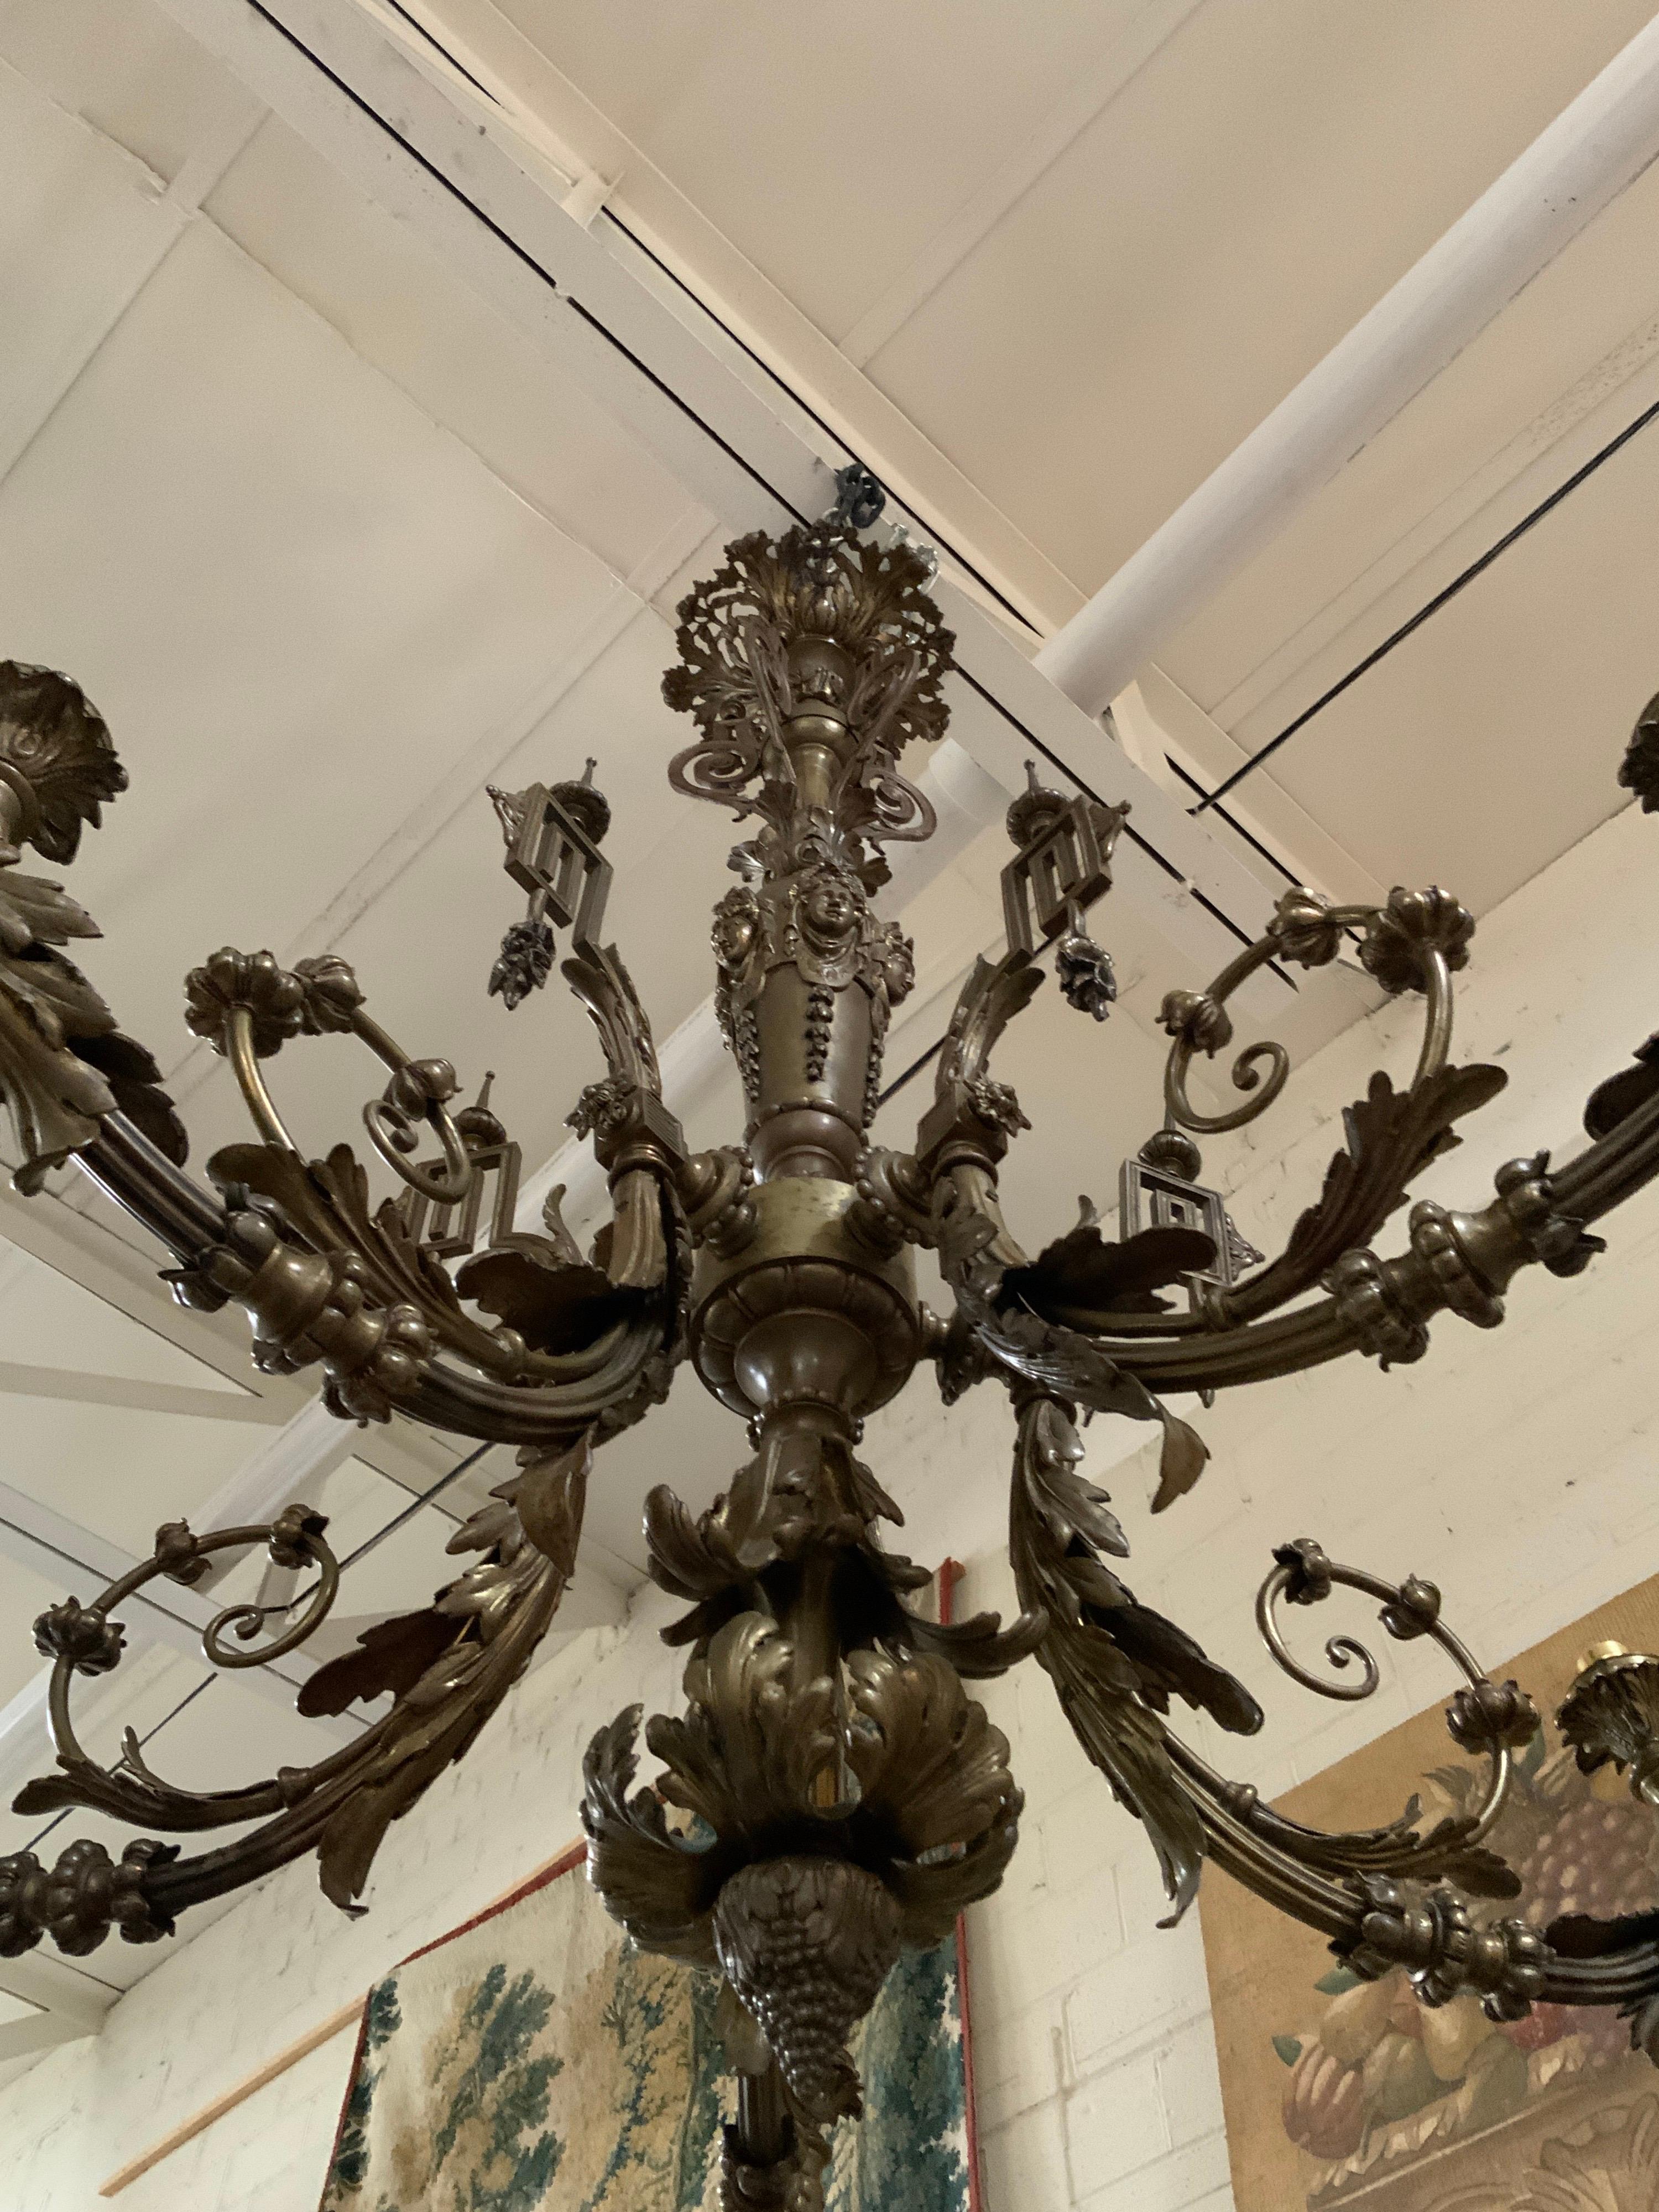 This gorgeous chandelier measures roughly 60 inches in height. Item features angels on the center stem and vine detailing along the edges. imported from Paris.